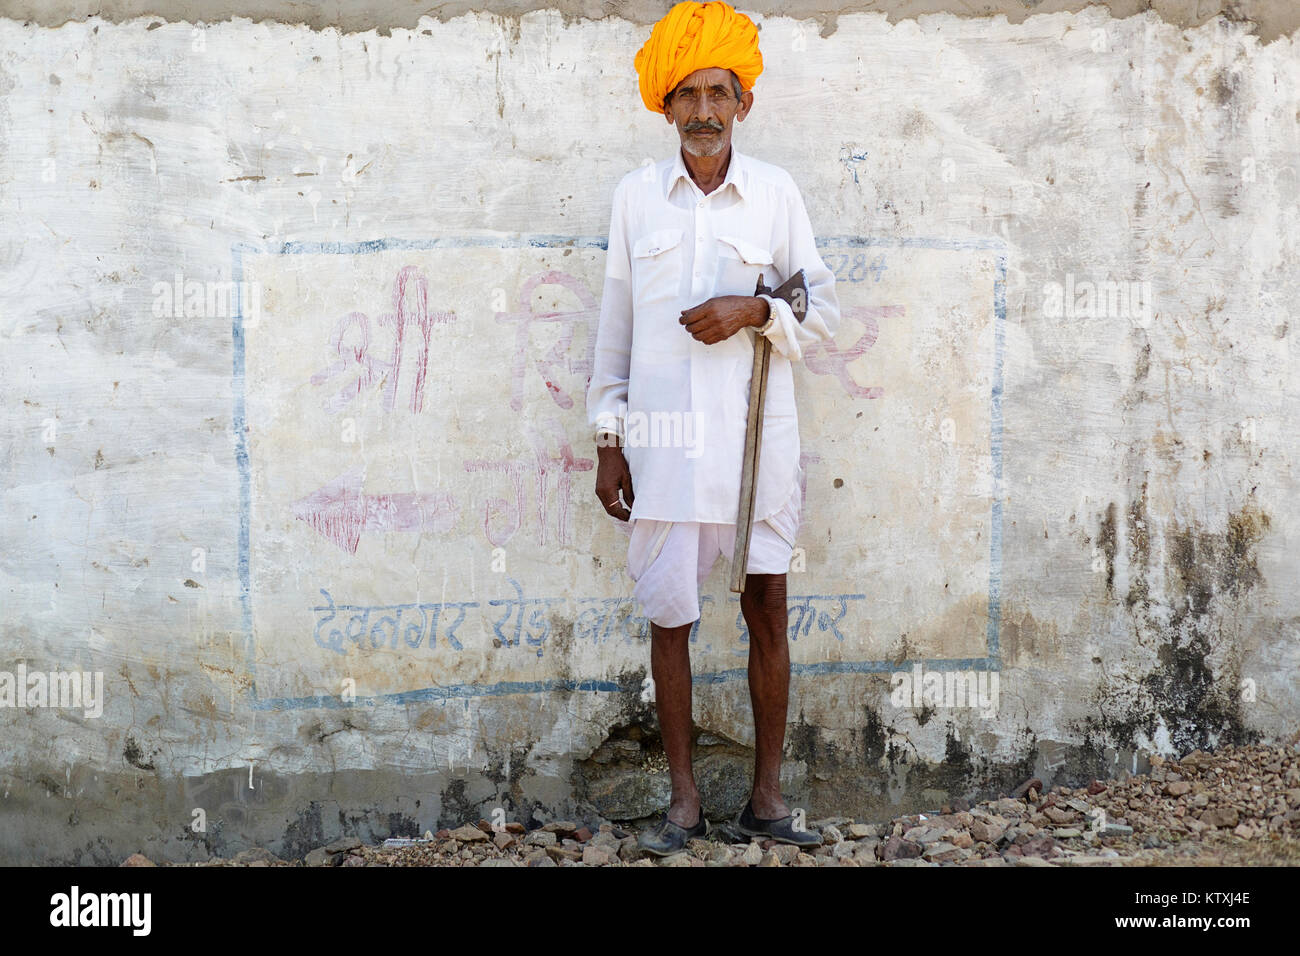 Old indian man in white outfit wearing orange turban, standing in front of white wall in a village near Pushkar, Rajasthan, India. Stock Photo